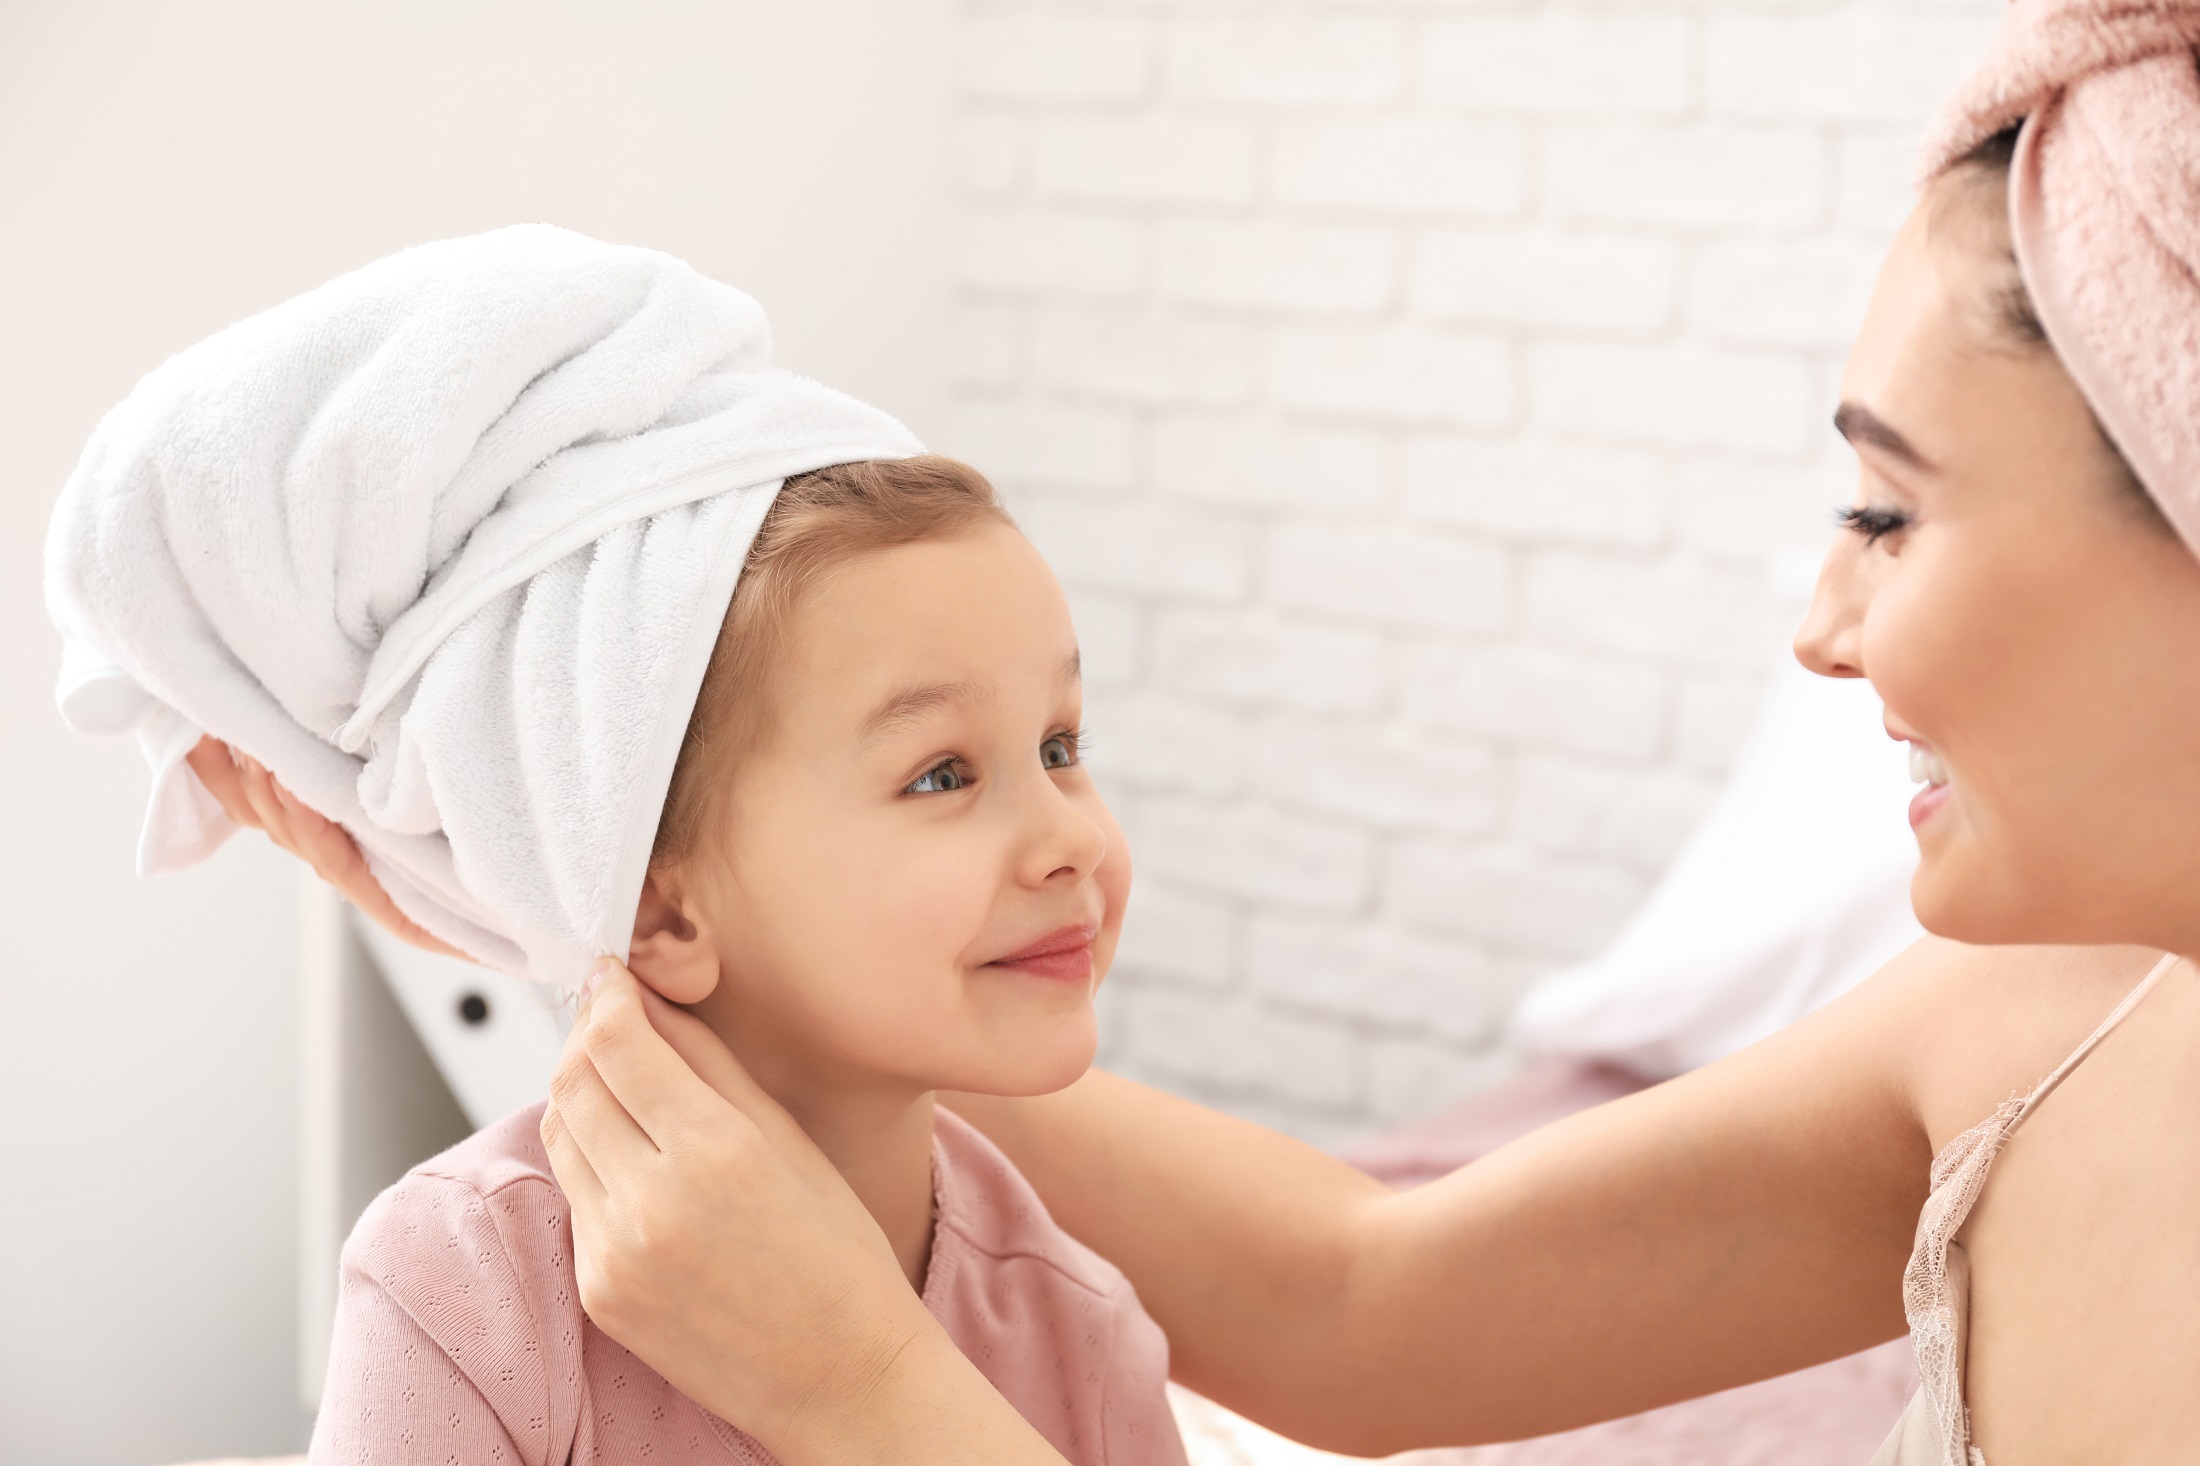 How to take care of children’s hair to make it strong, thick and shiny?